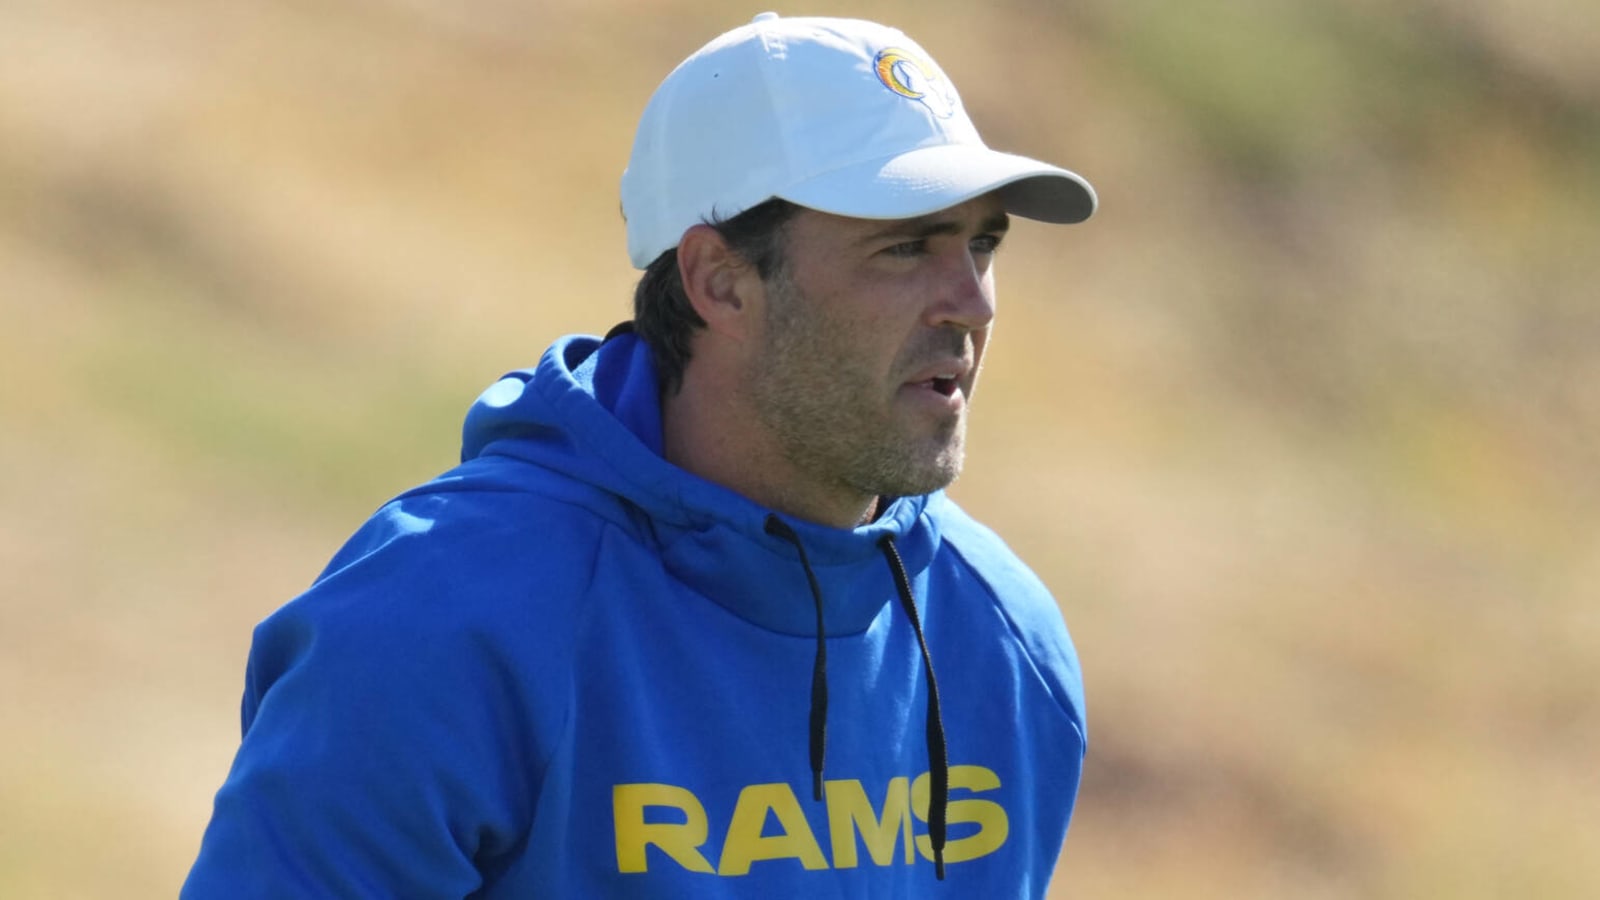 Rams’ Zac Robinson becoming OC candidate for Chargers, Ravens